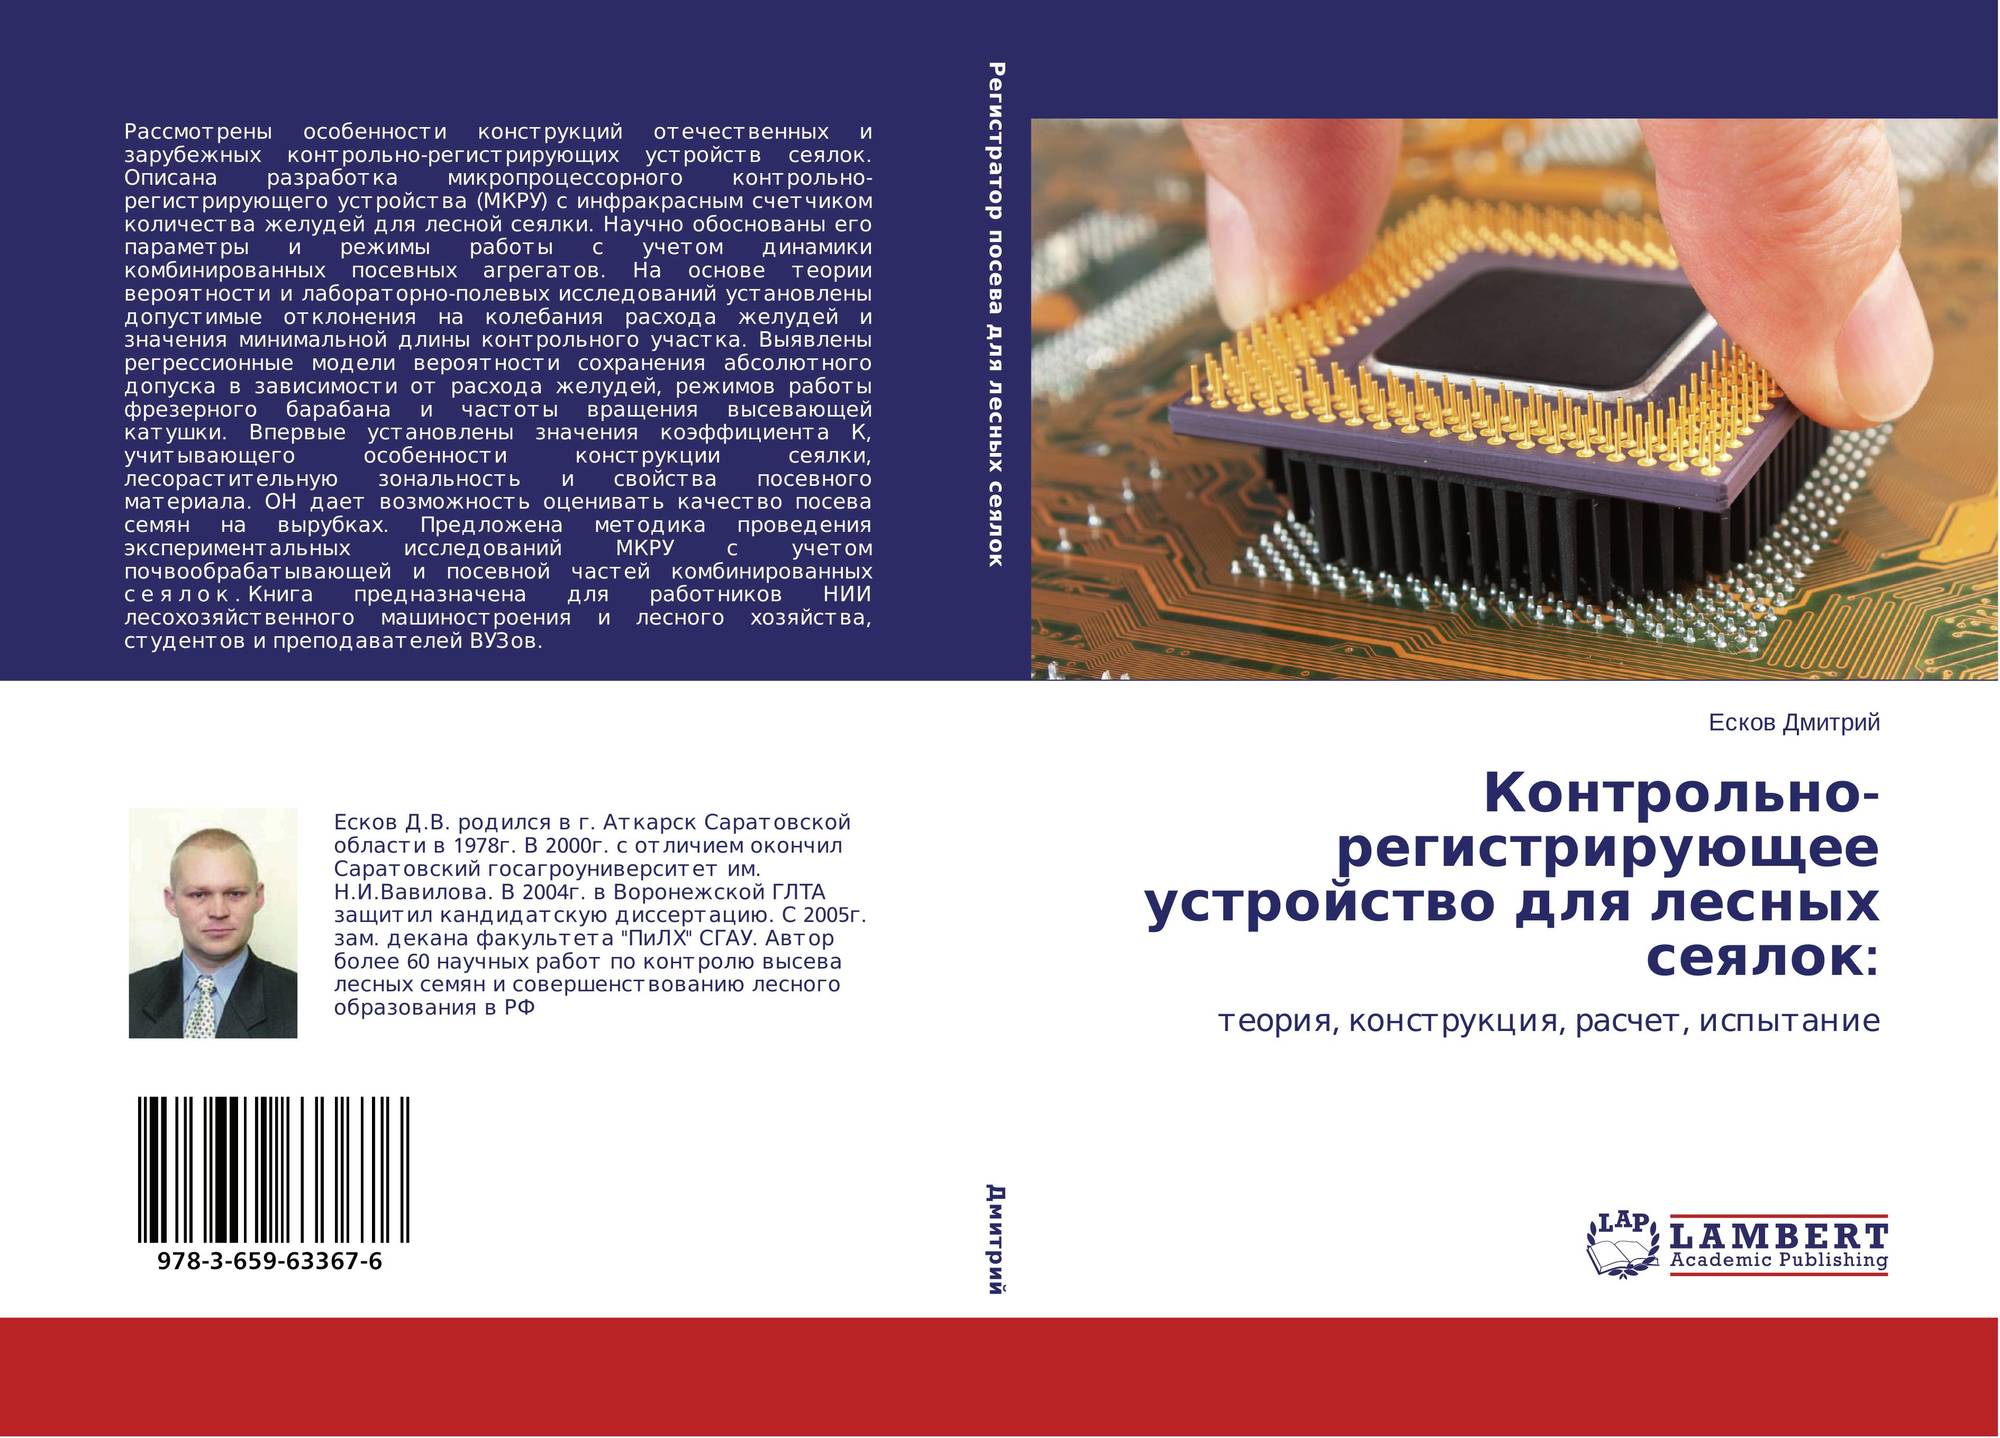 System Design книга. Processors used in embedded Systems. FPGA image processing book. Digital Signal processing and VLSI. Such a state